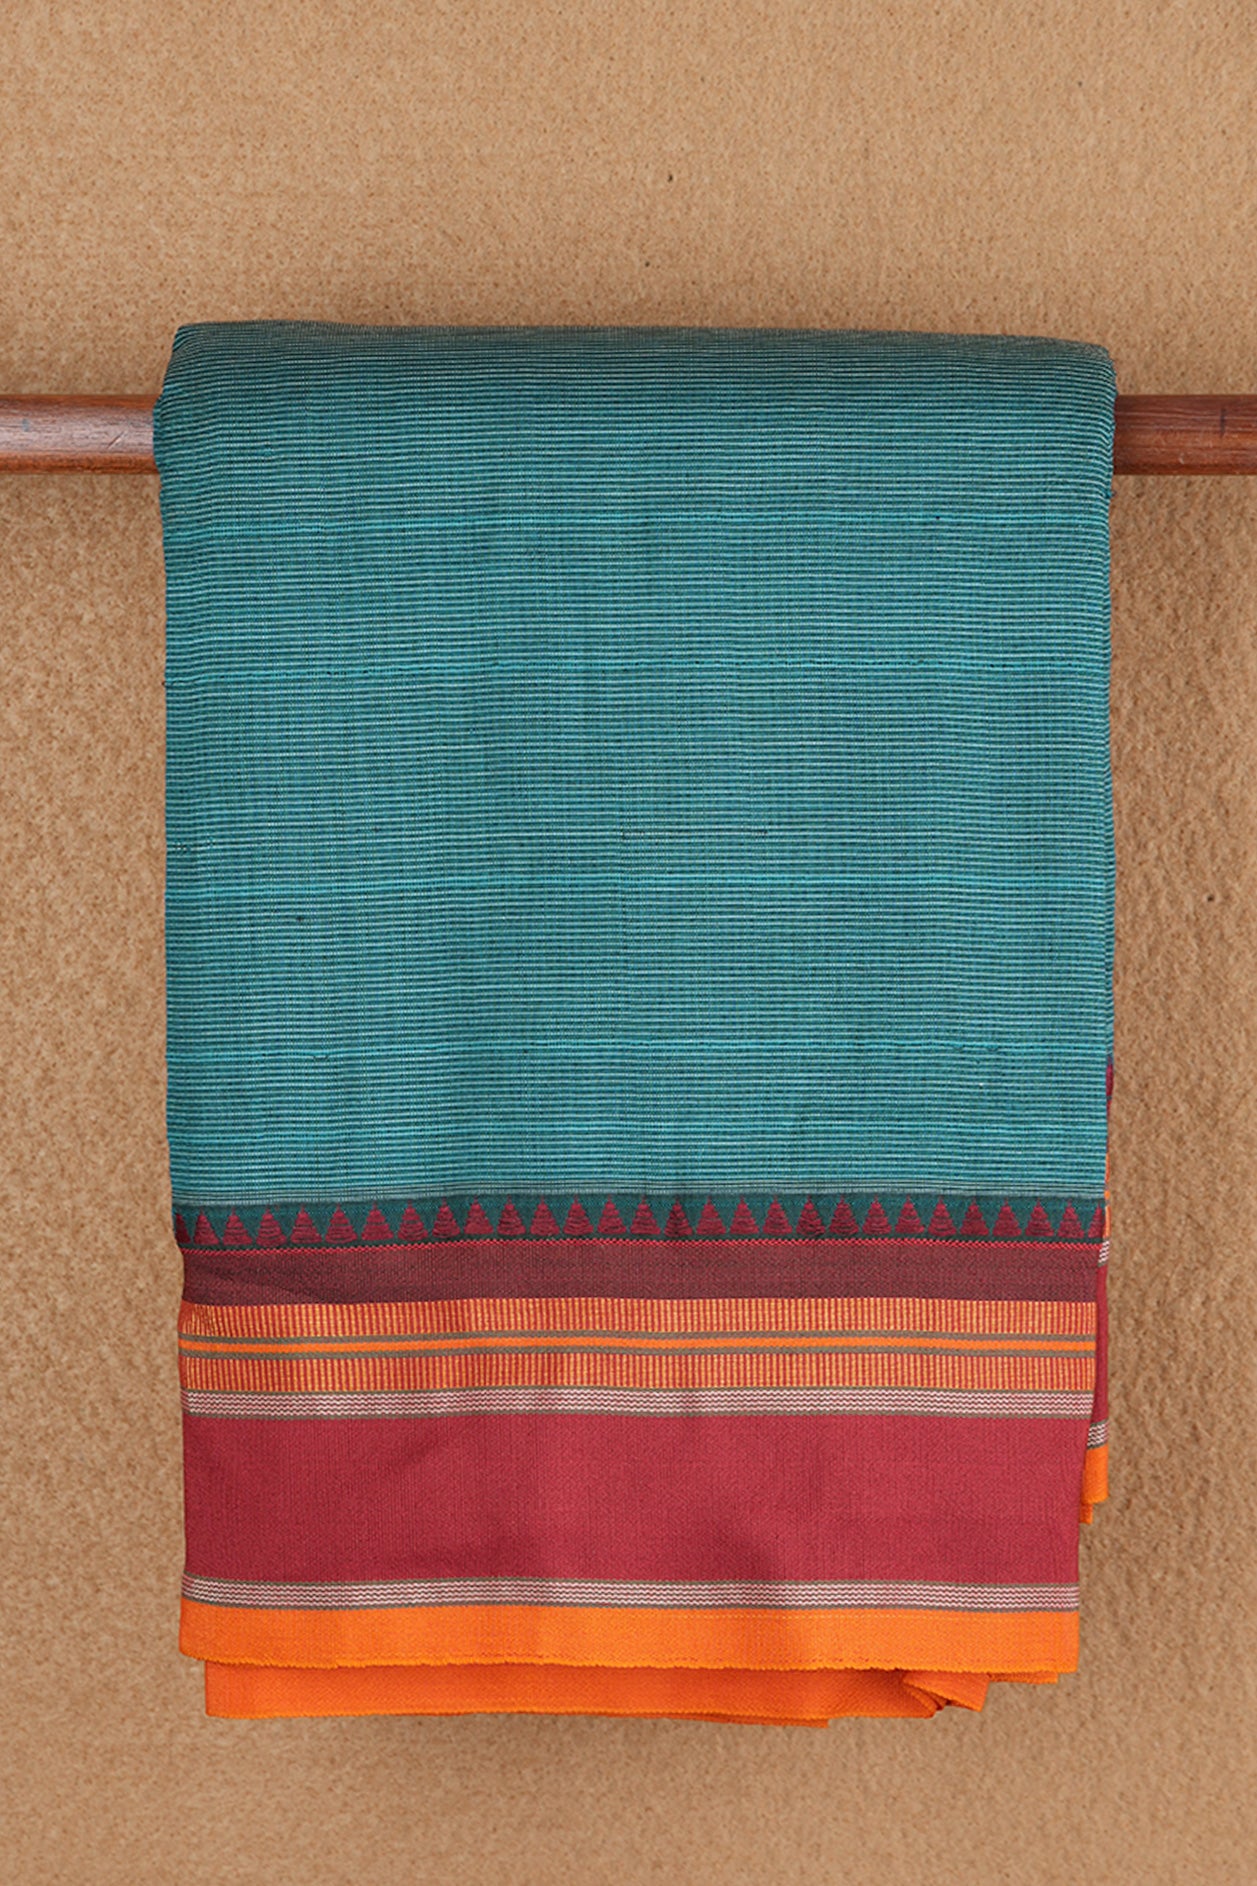 Contrast Border With Stripes Teal Blue Dharwad Cotton Saree